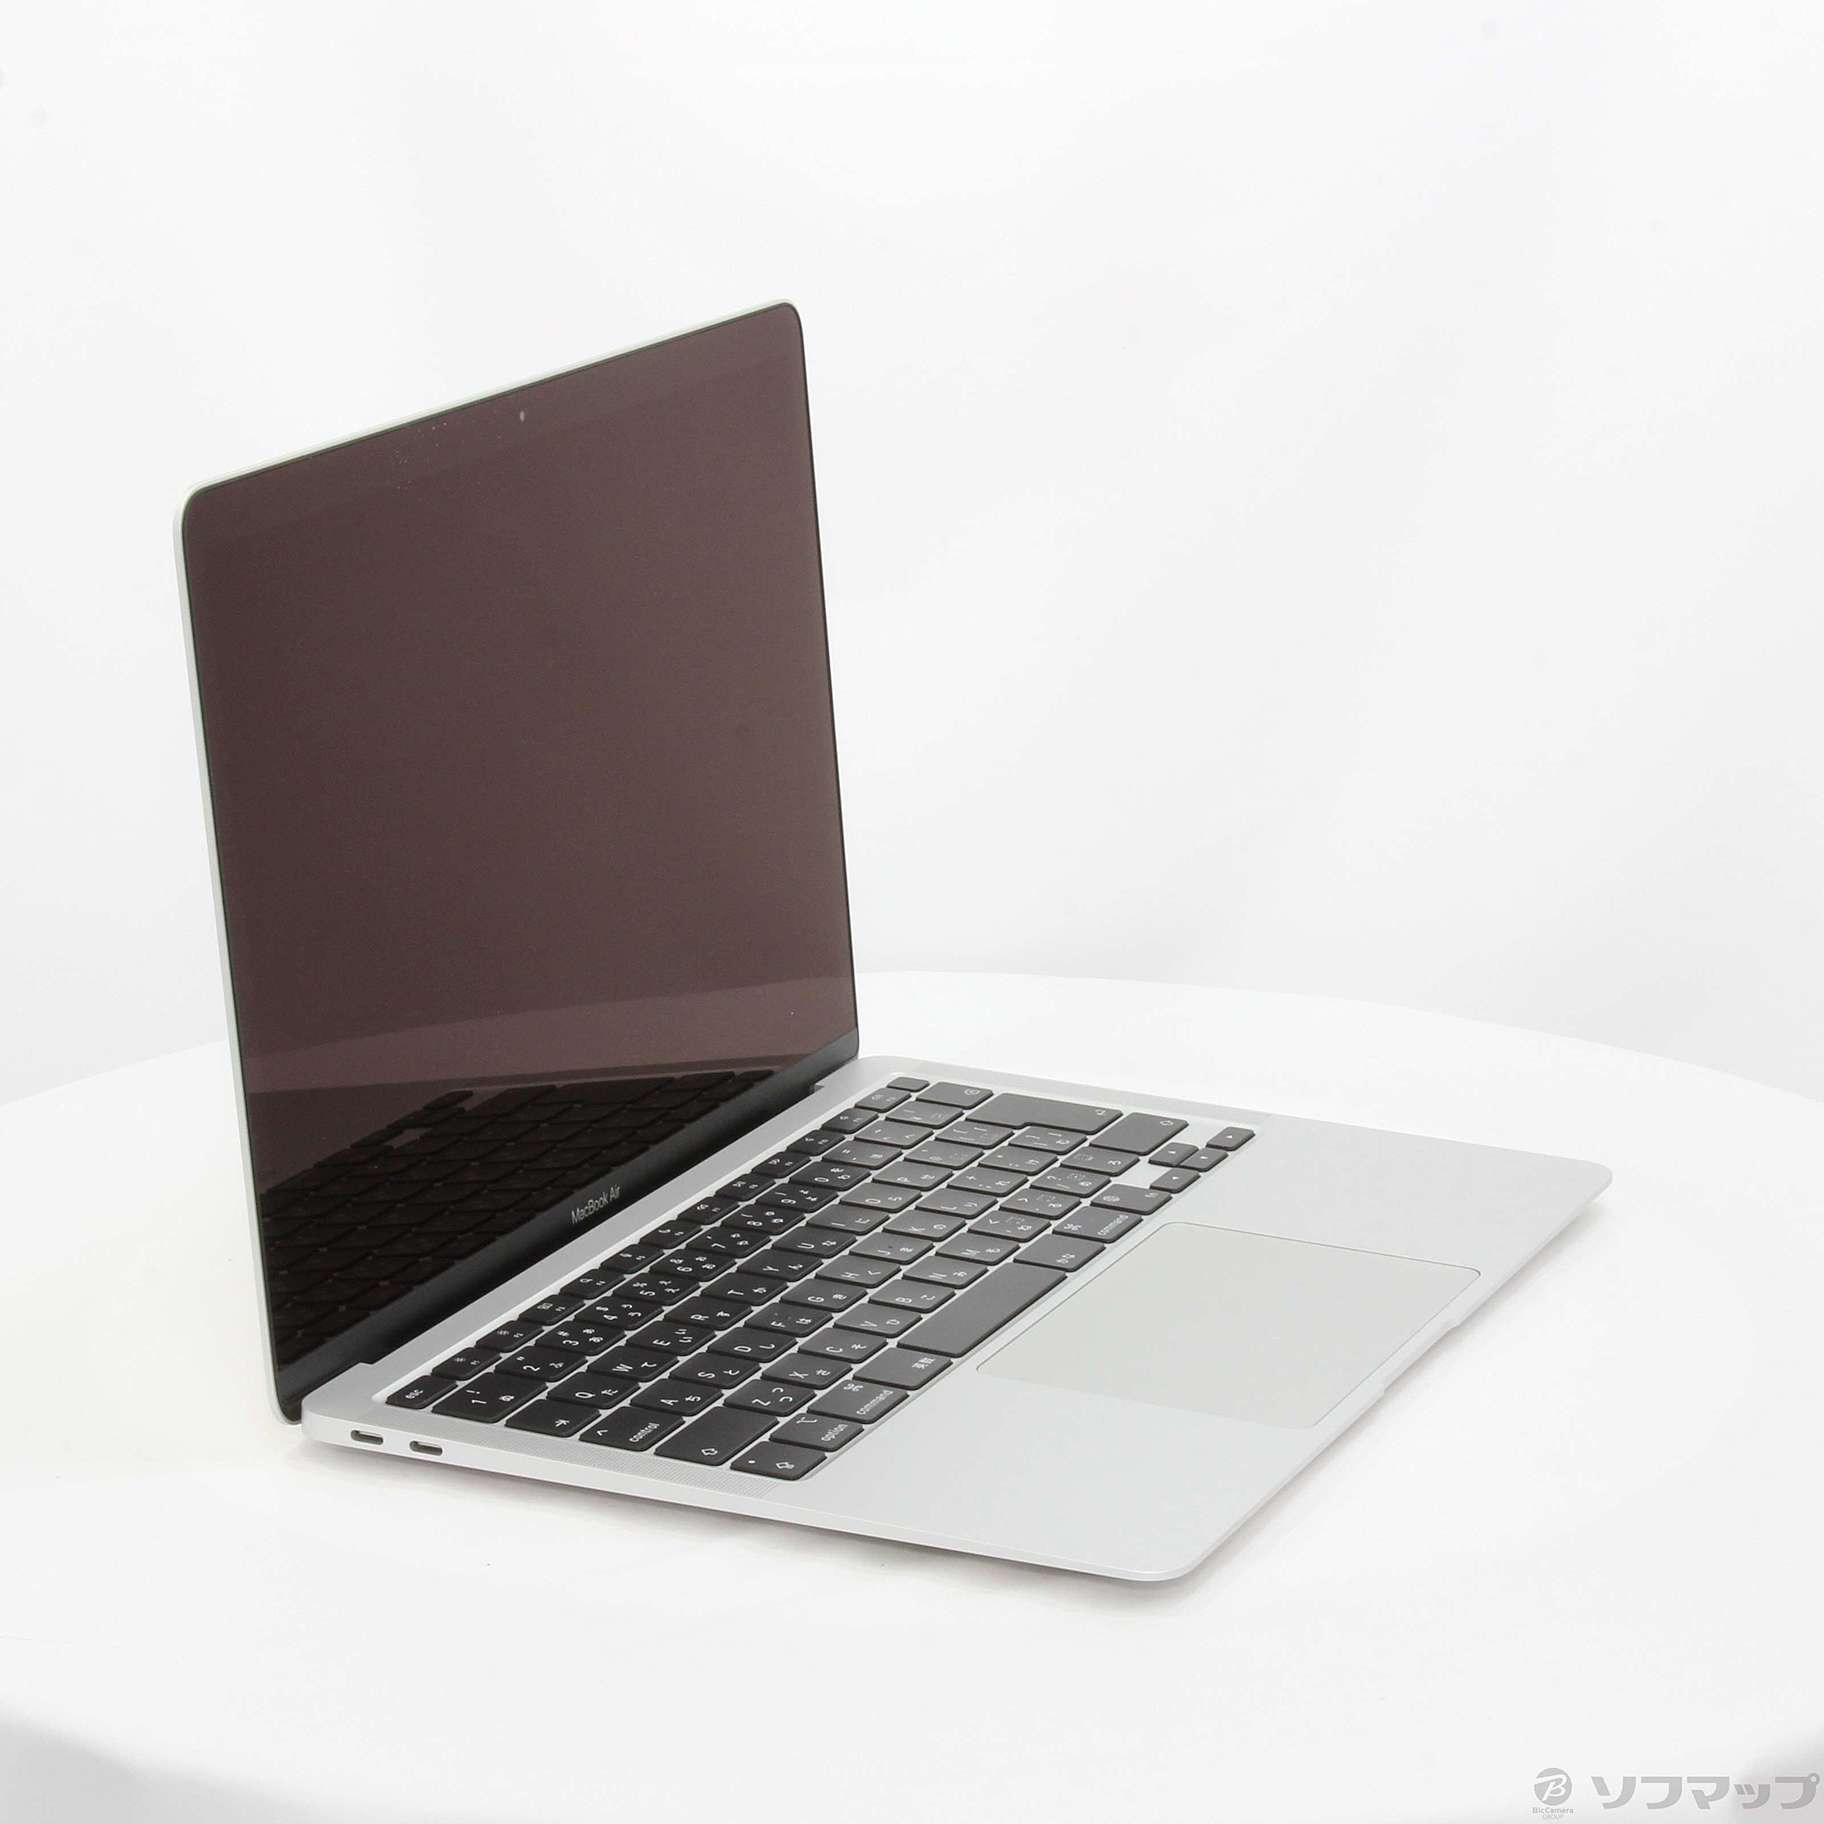 MacBook Air 13.3-inch Late 2020 MGN93J／A Apple M1 8コアCPU_7コアGPU 8GB  SSD256GB シルバー 〔macOS v11.4〕 ◇07/19(月)値下げ！